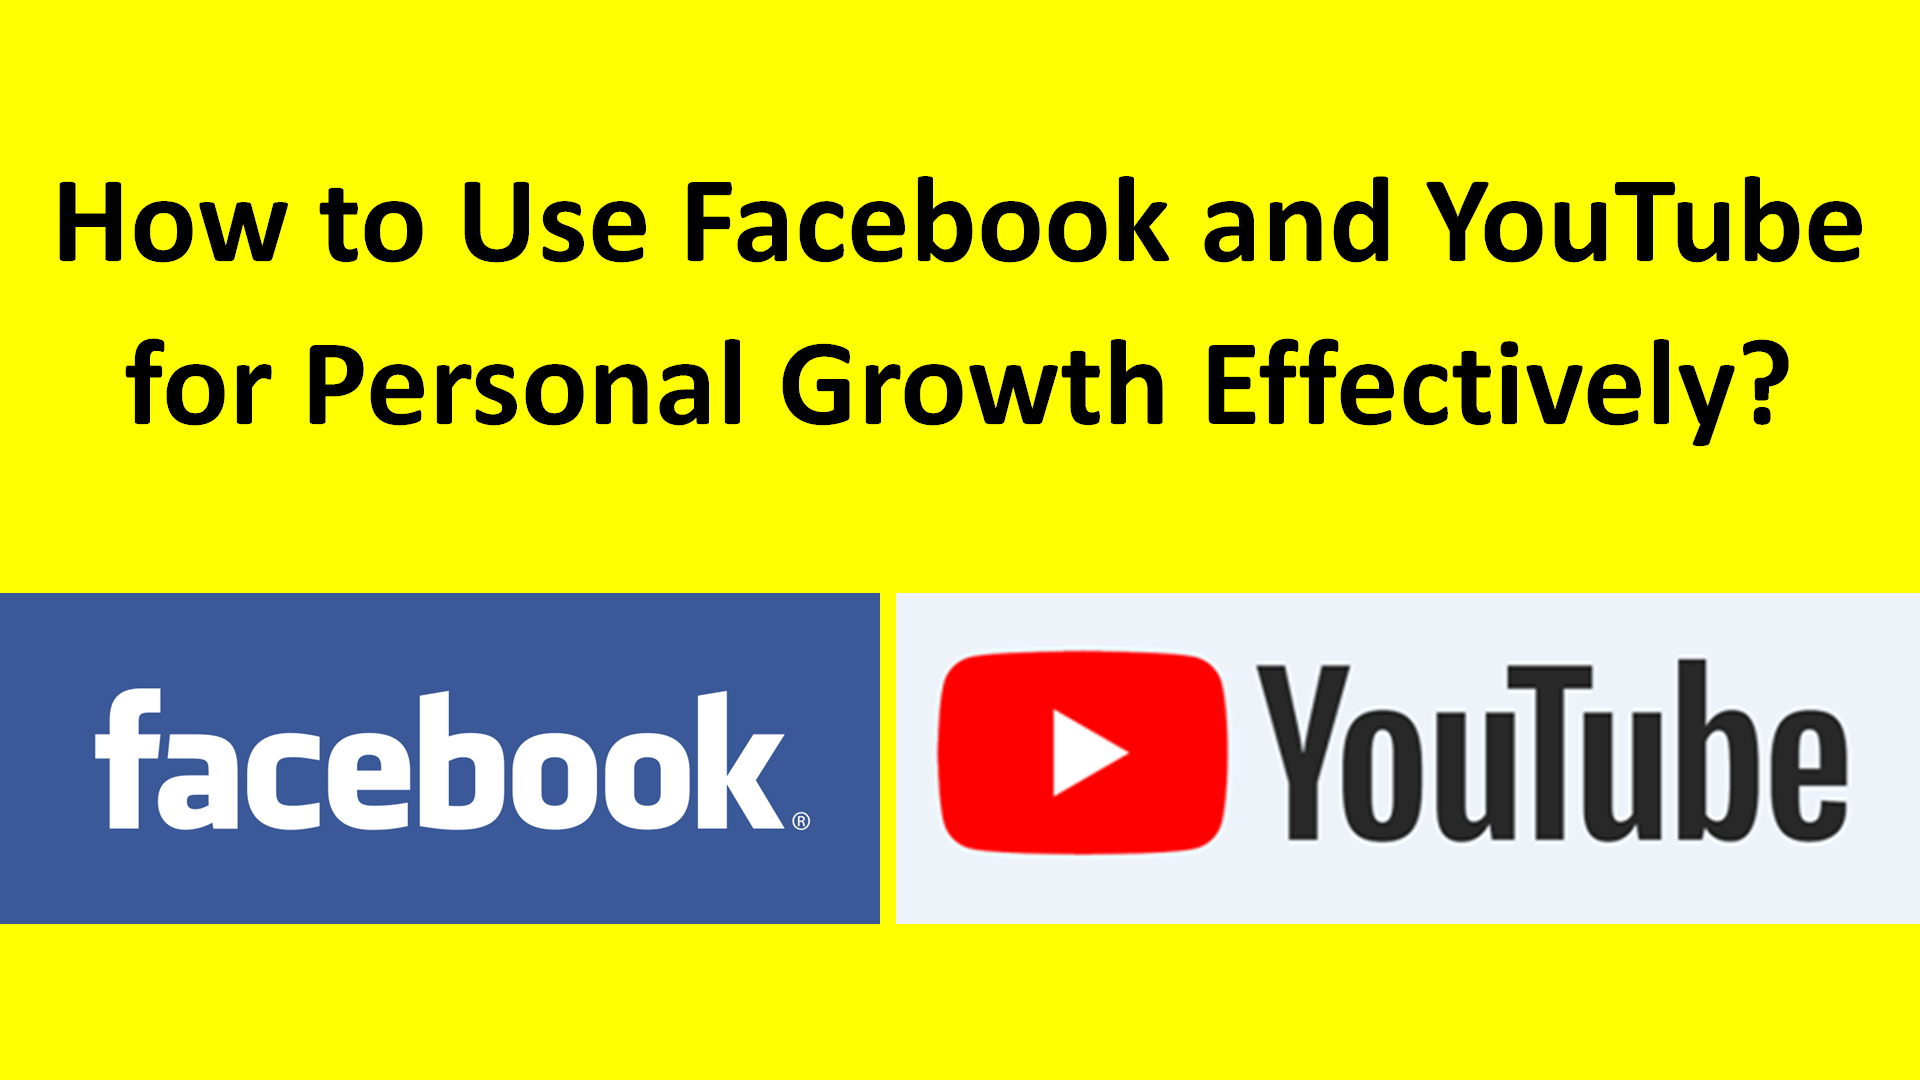 How to Use Facebook and YouTube for Personal Growth Effectively